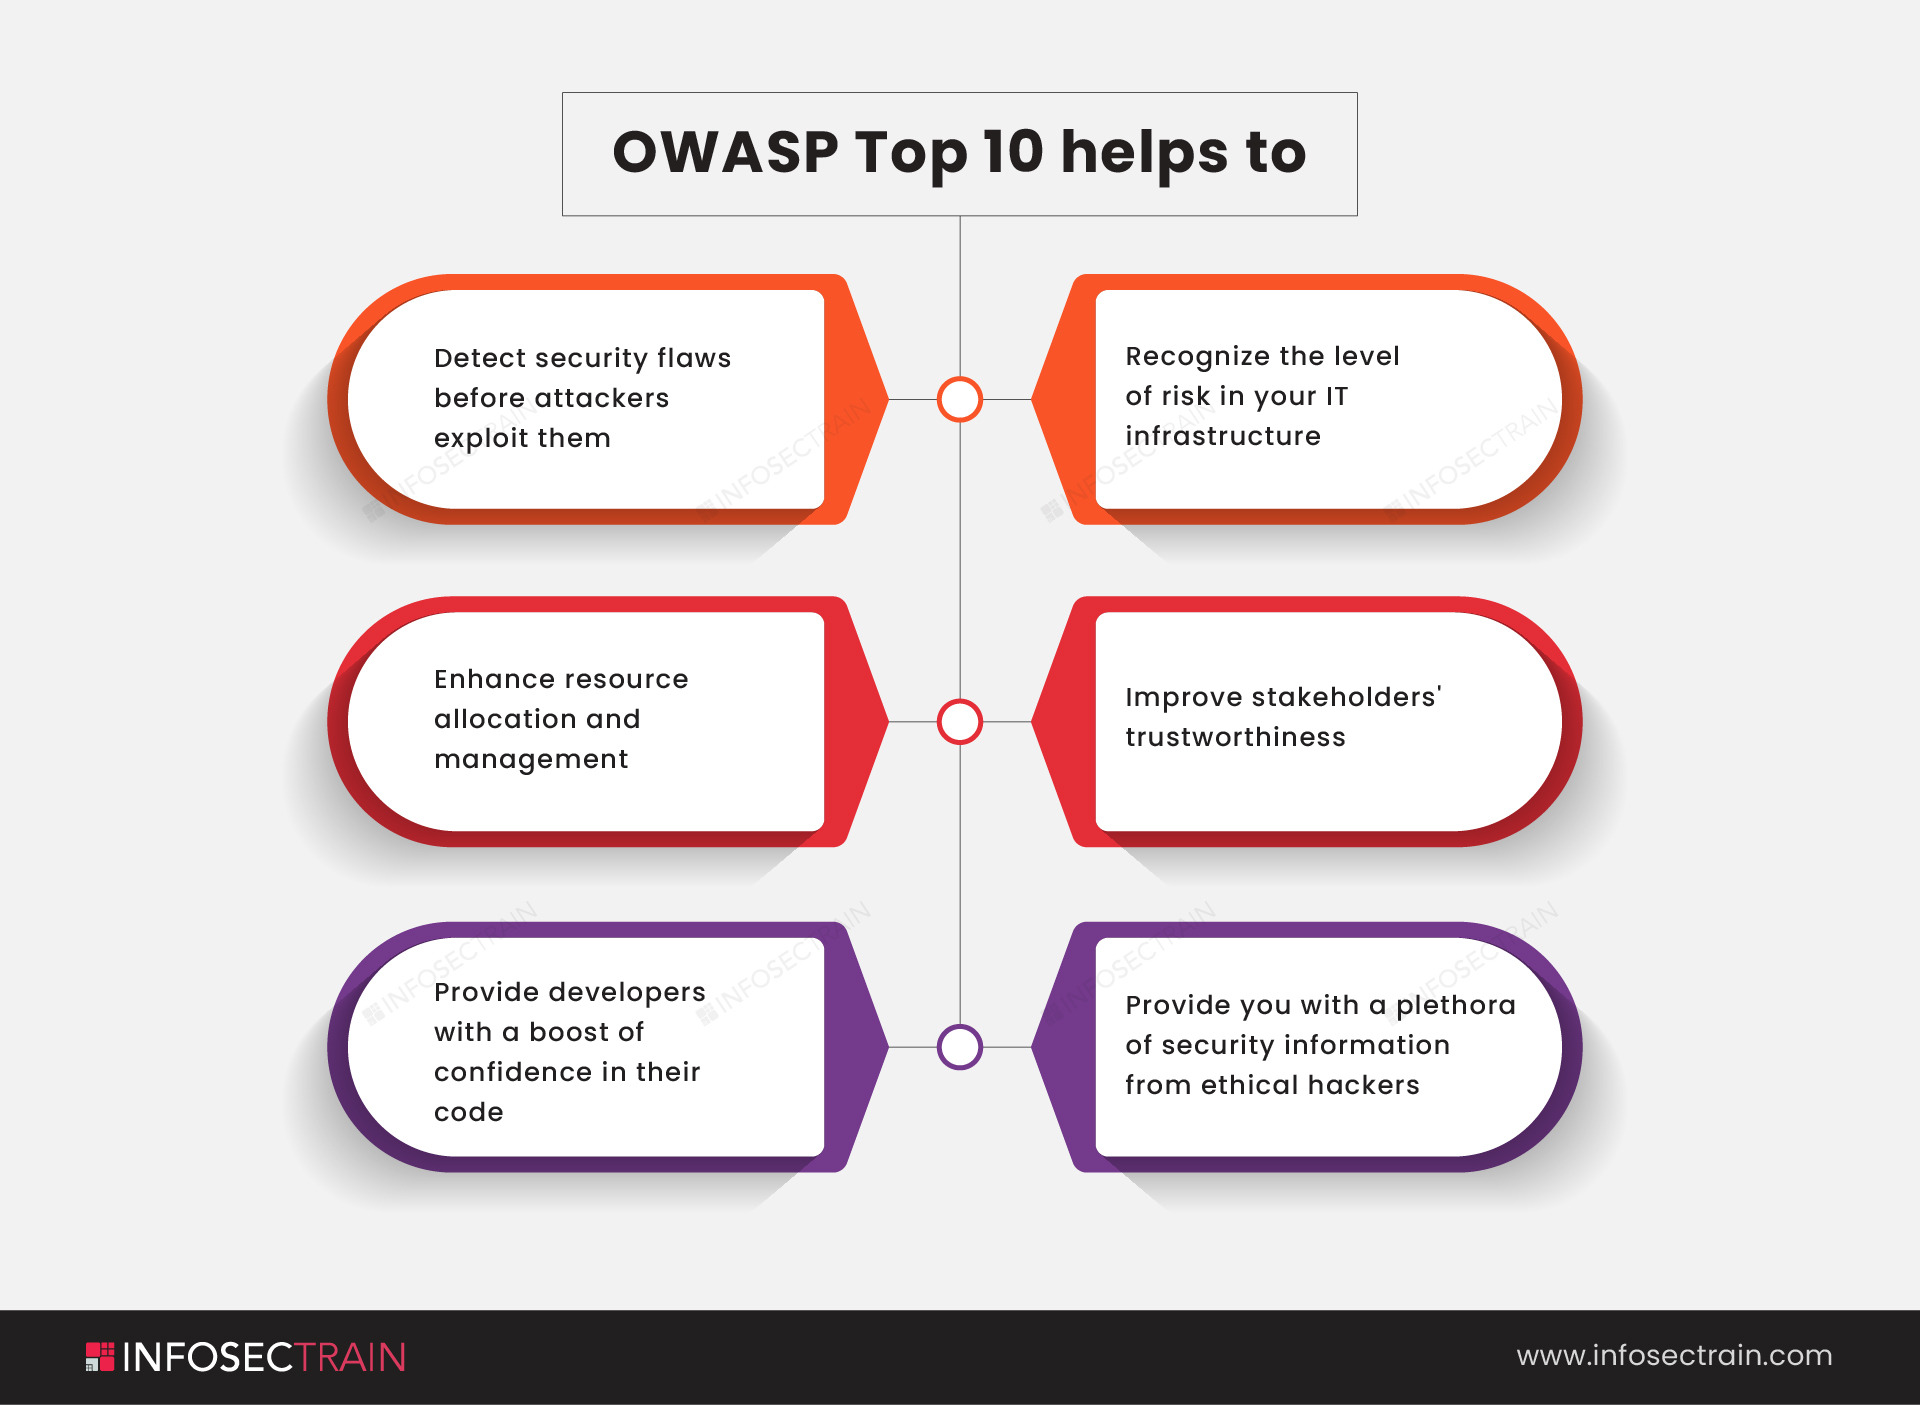 OWASP Top 10 helps to